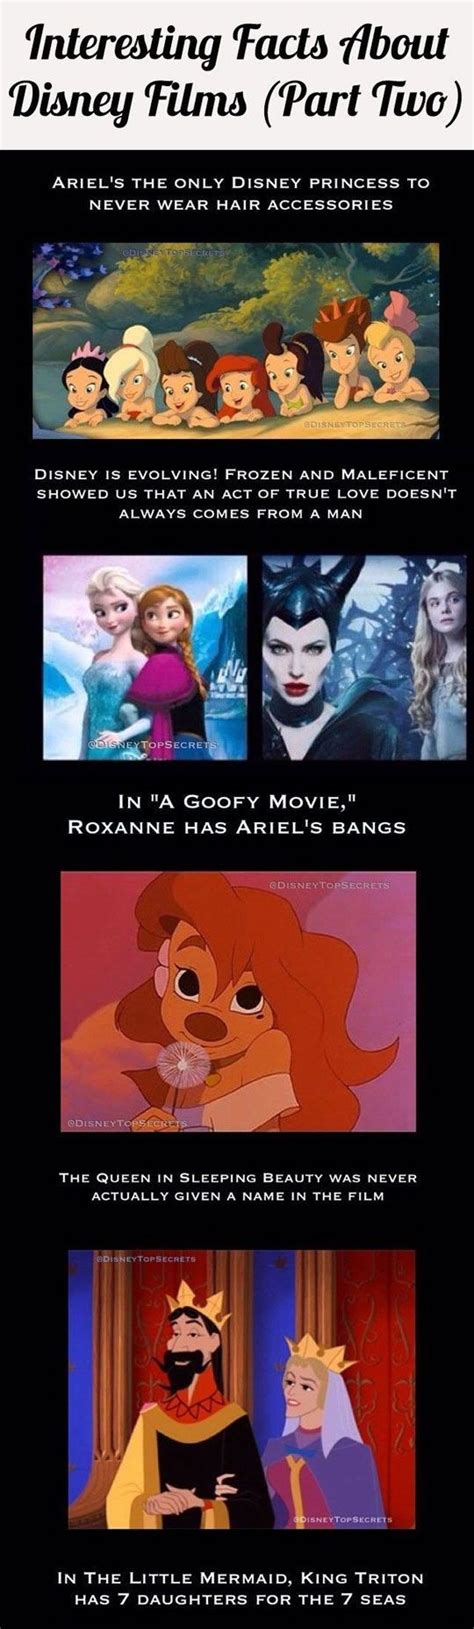 Humor Fun Facts About Disney Movies Mind Blown Little Mermaids